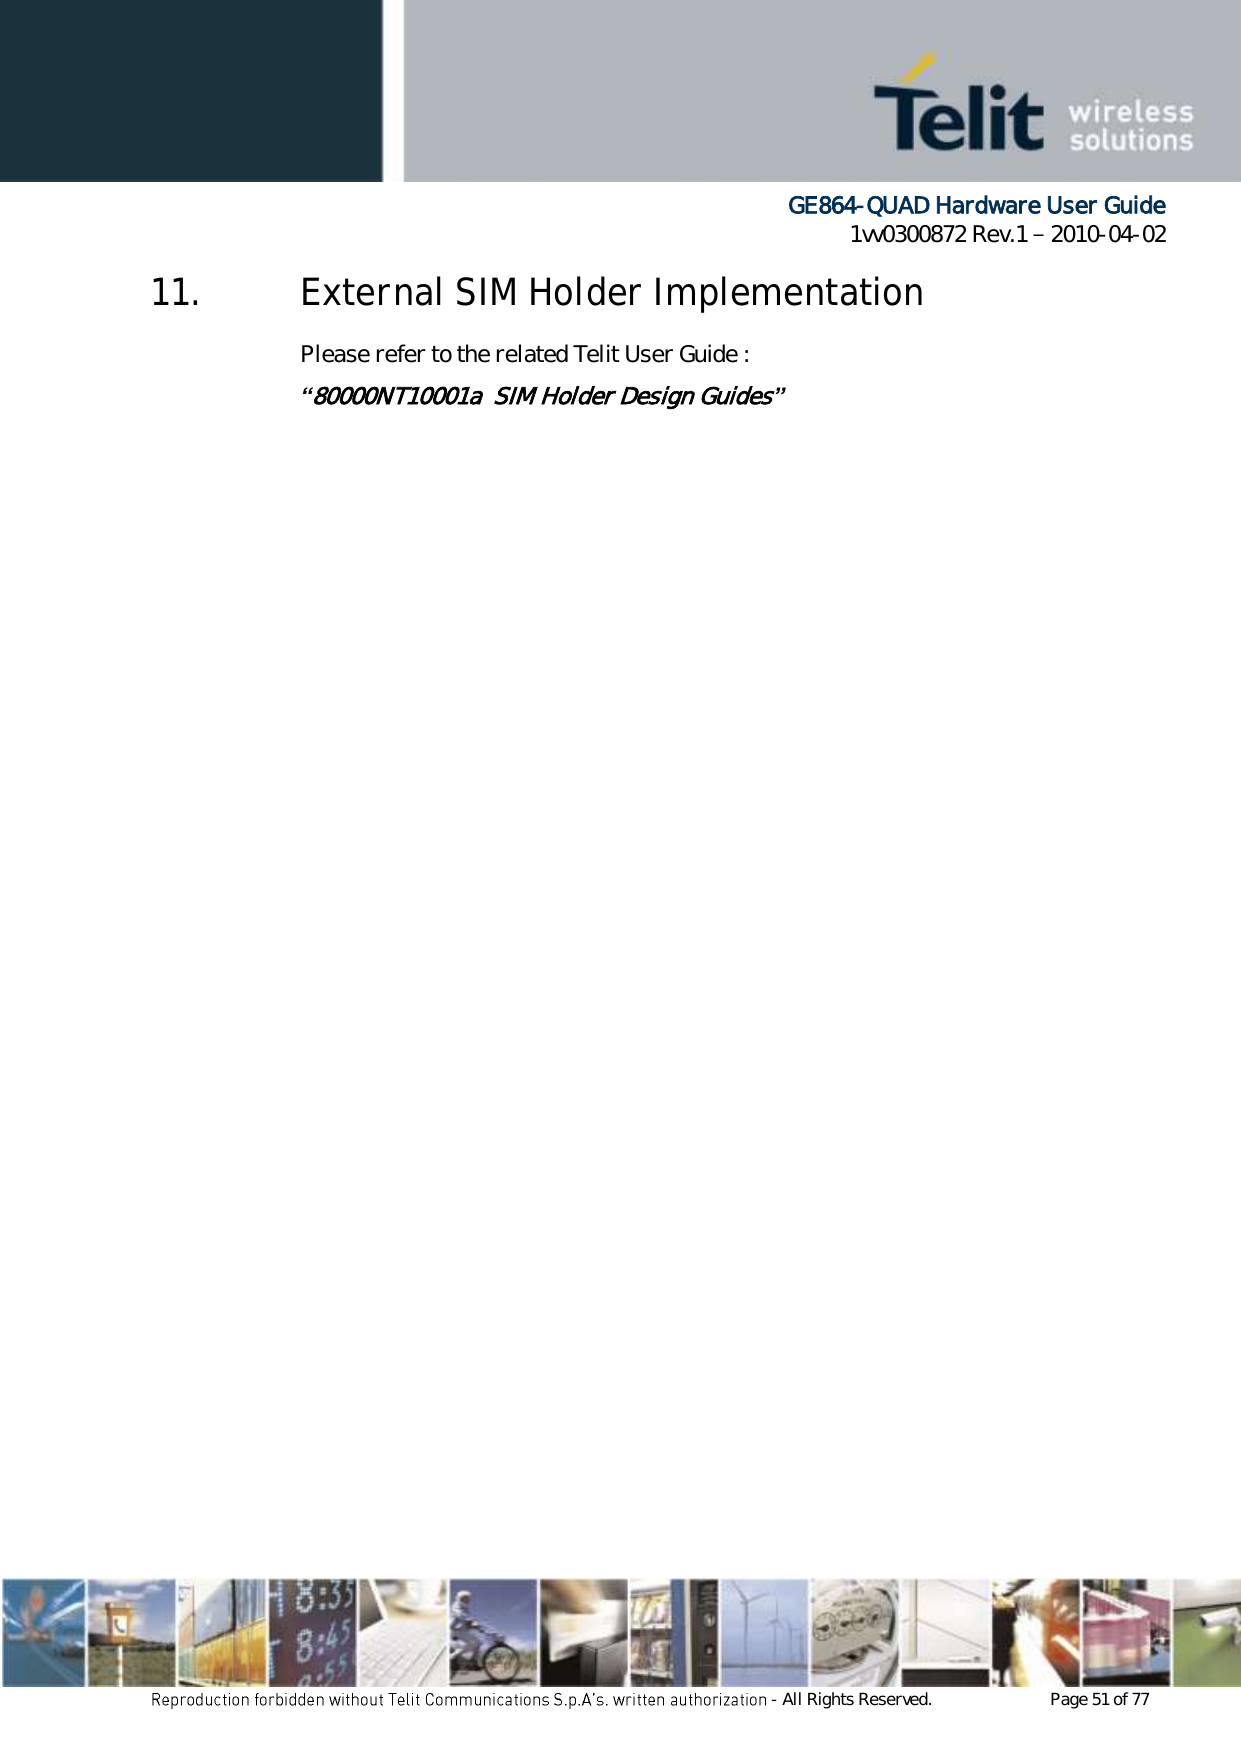      GE864-QUAD Hardware User Guide 1vv0300872 Rev.1   2010-04-02 - All Rights Reserved.    Page 51 of 77  11. External SIM Holder Implementation Please refer to the related Telit User Guide :  “80000NT10001a  SIM Holder Design Guides” 